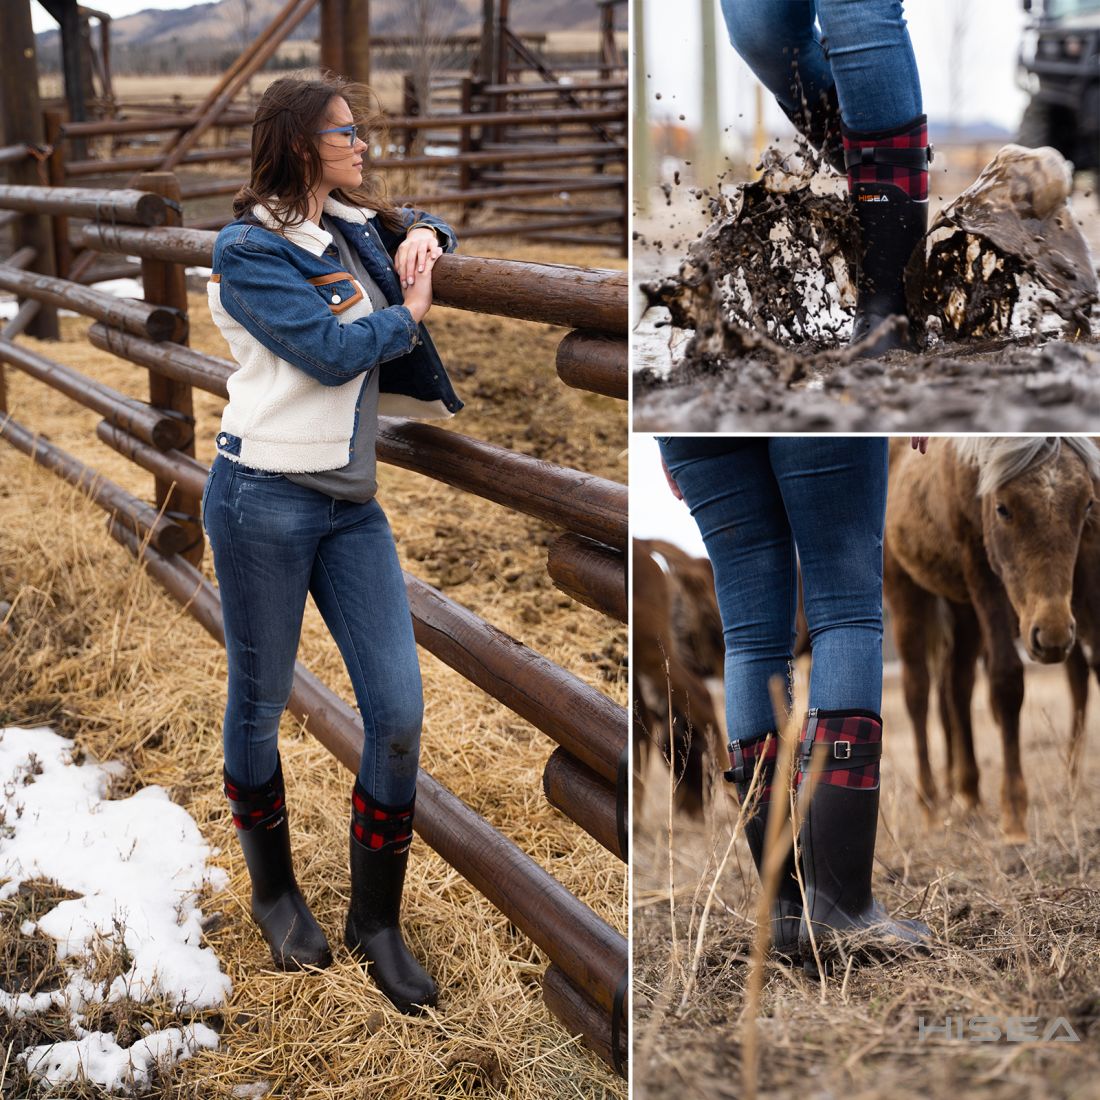 Women's Rubber Mud Boots